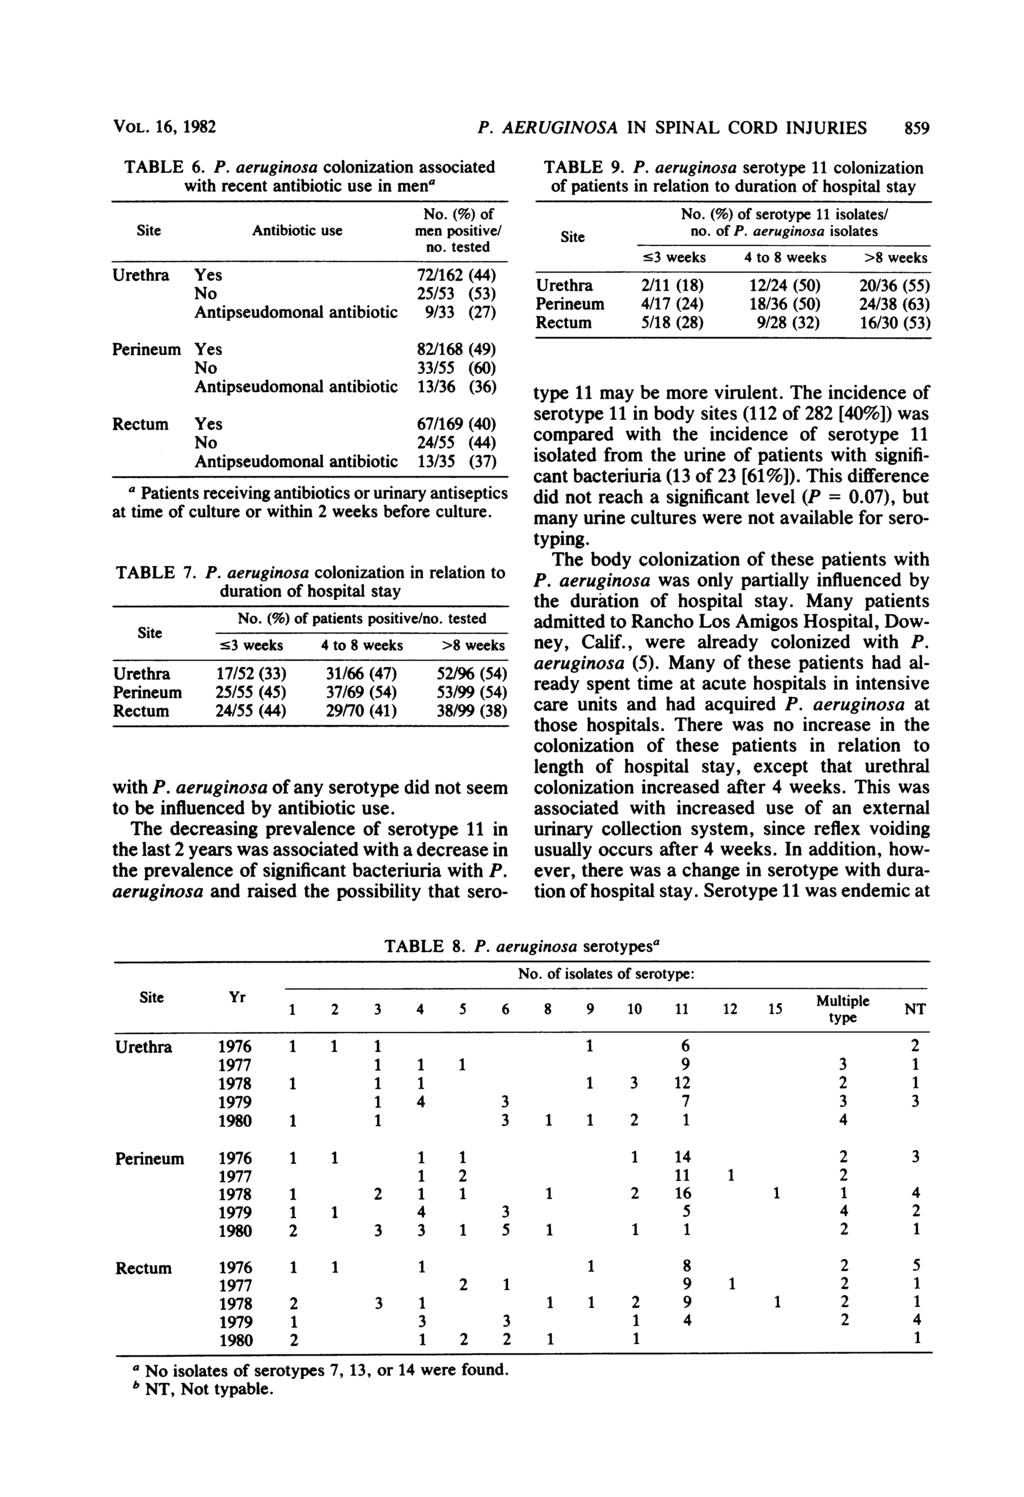 VOL. 16, 1982 TABLE 6. P. eruginos coloniztion ssocited with recent ntibiotic use in men No.